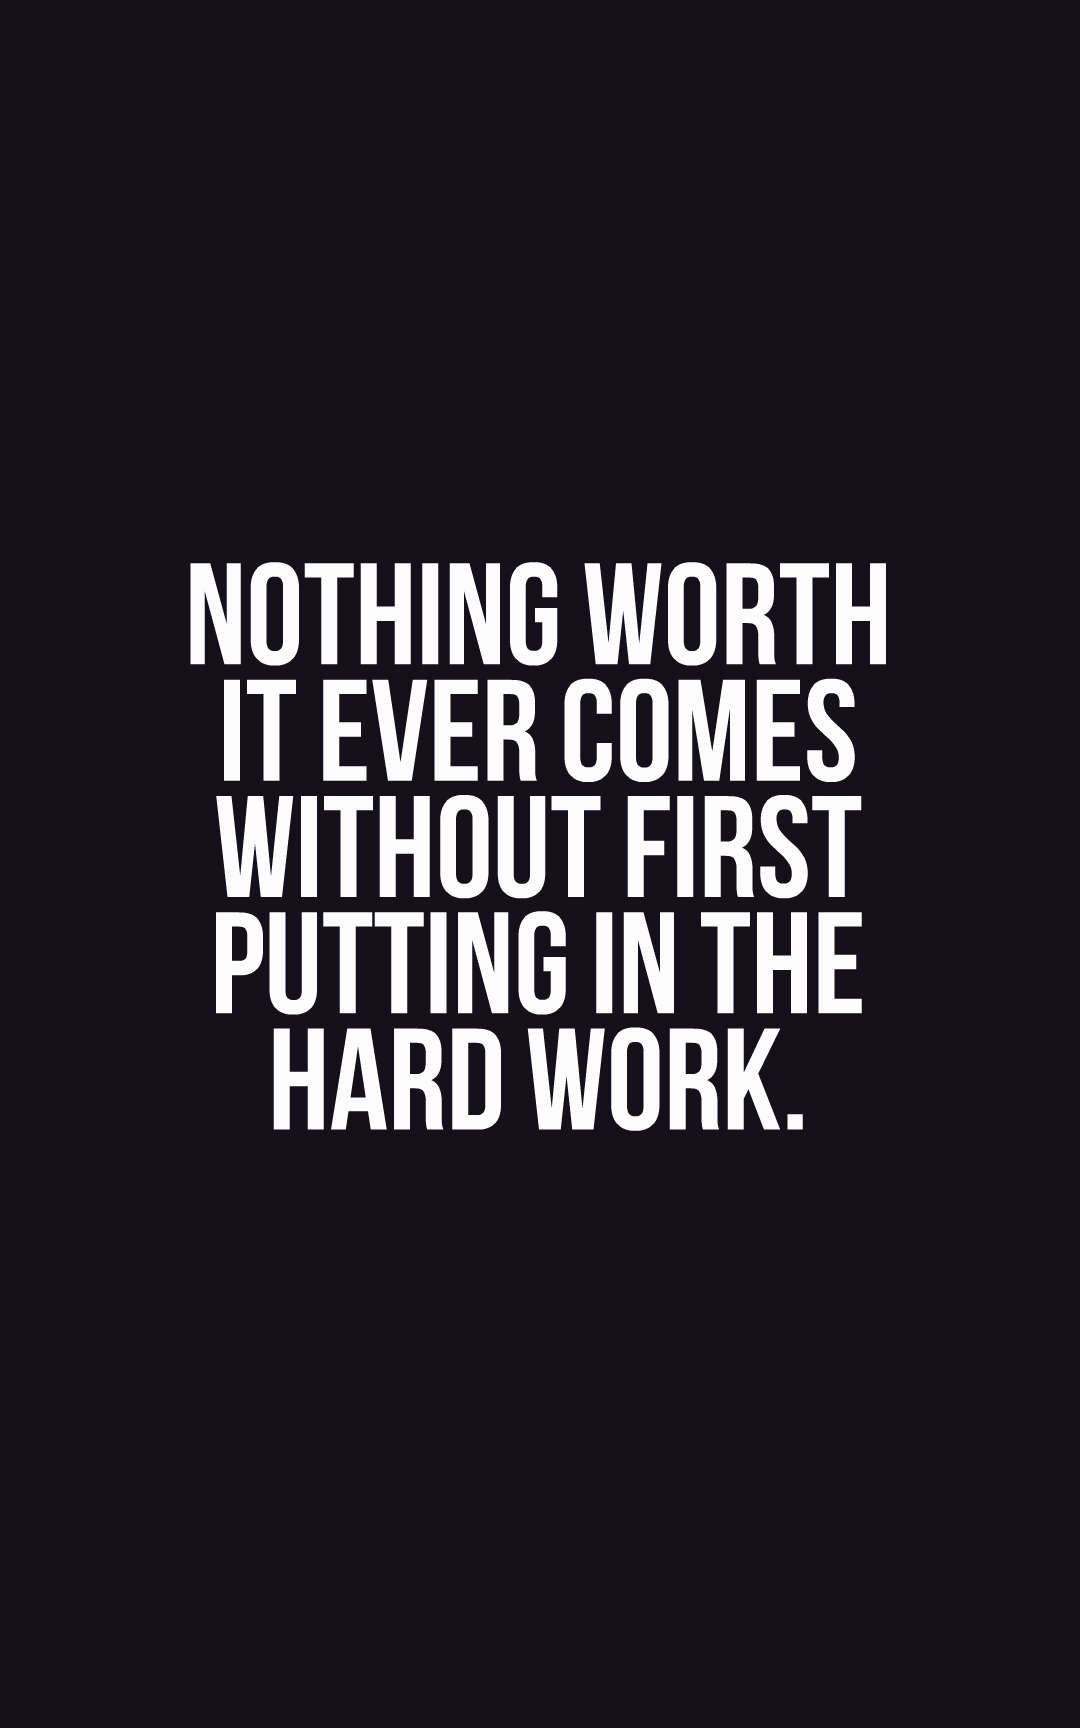 Nothing worth it ever comes without first putting in the hard work.